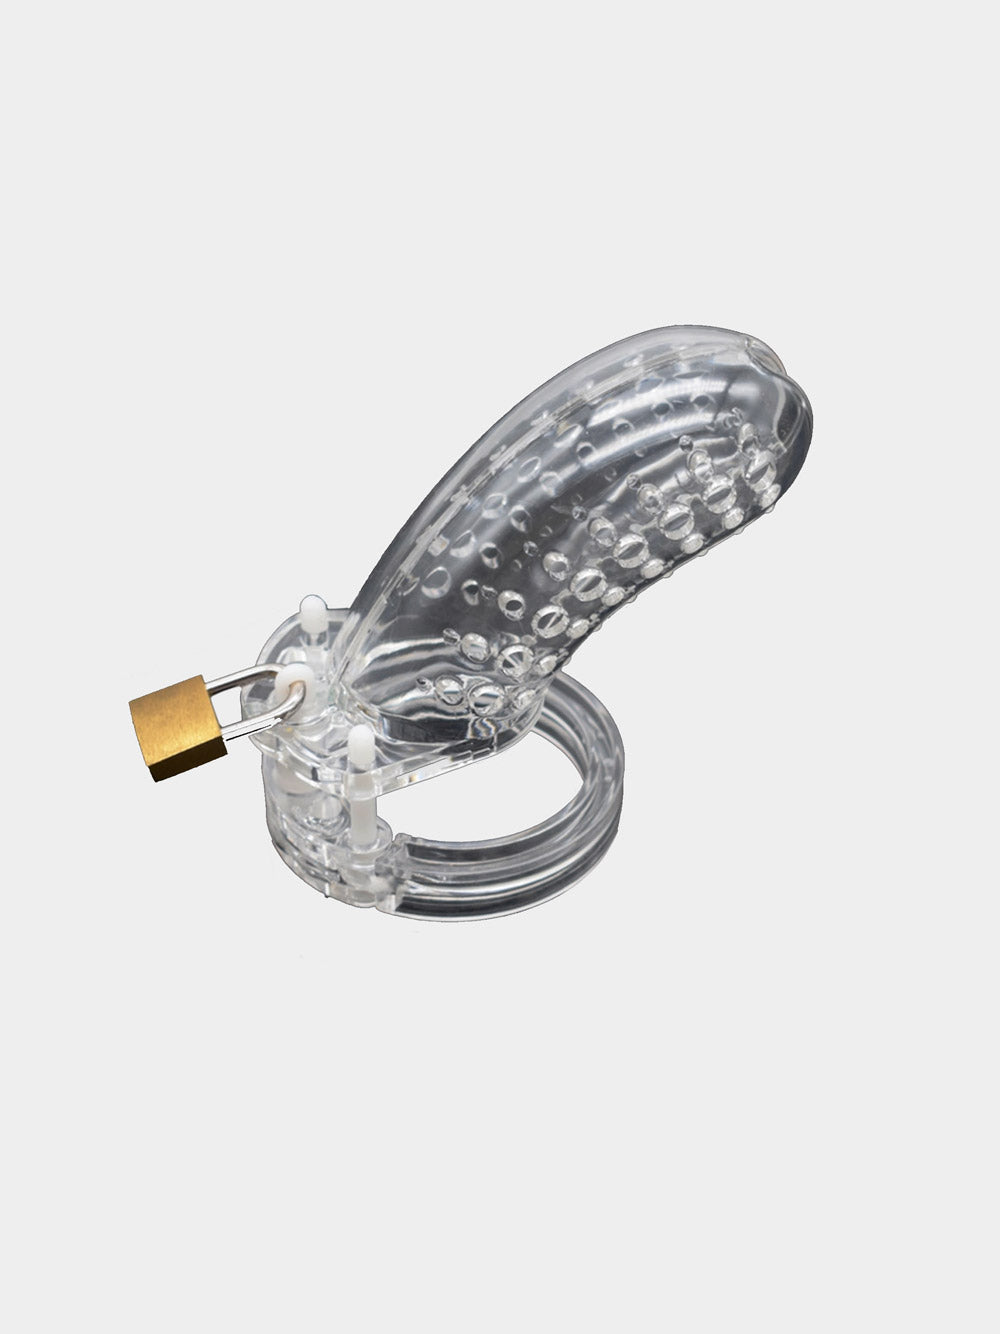 A kinky transparent cock cage made from hard plastic